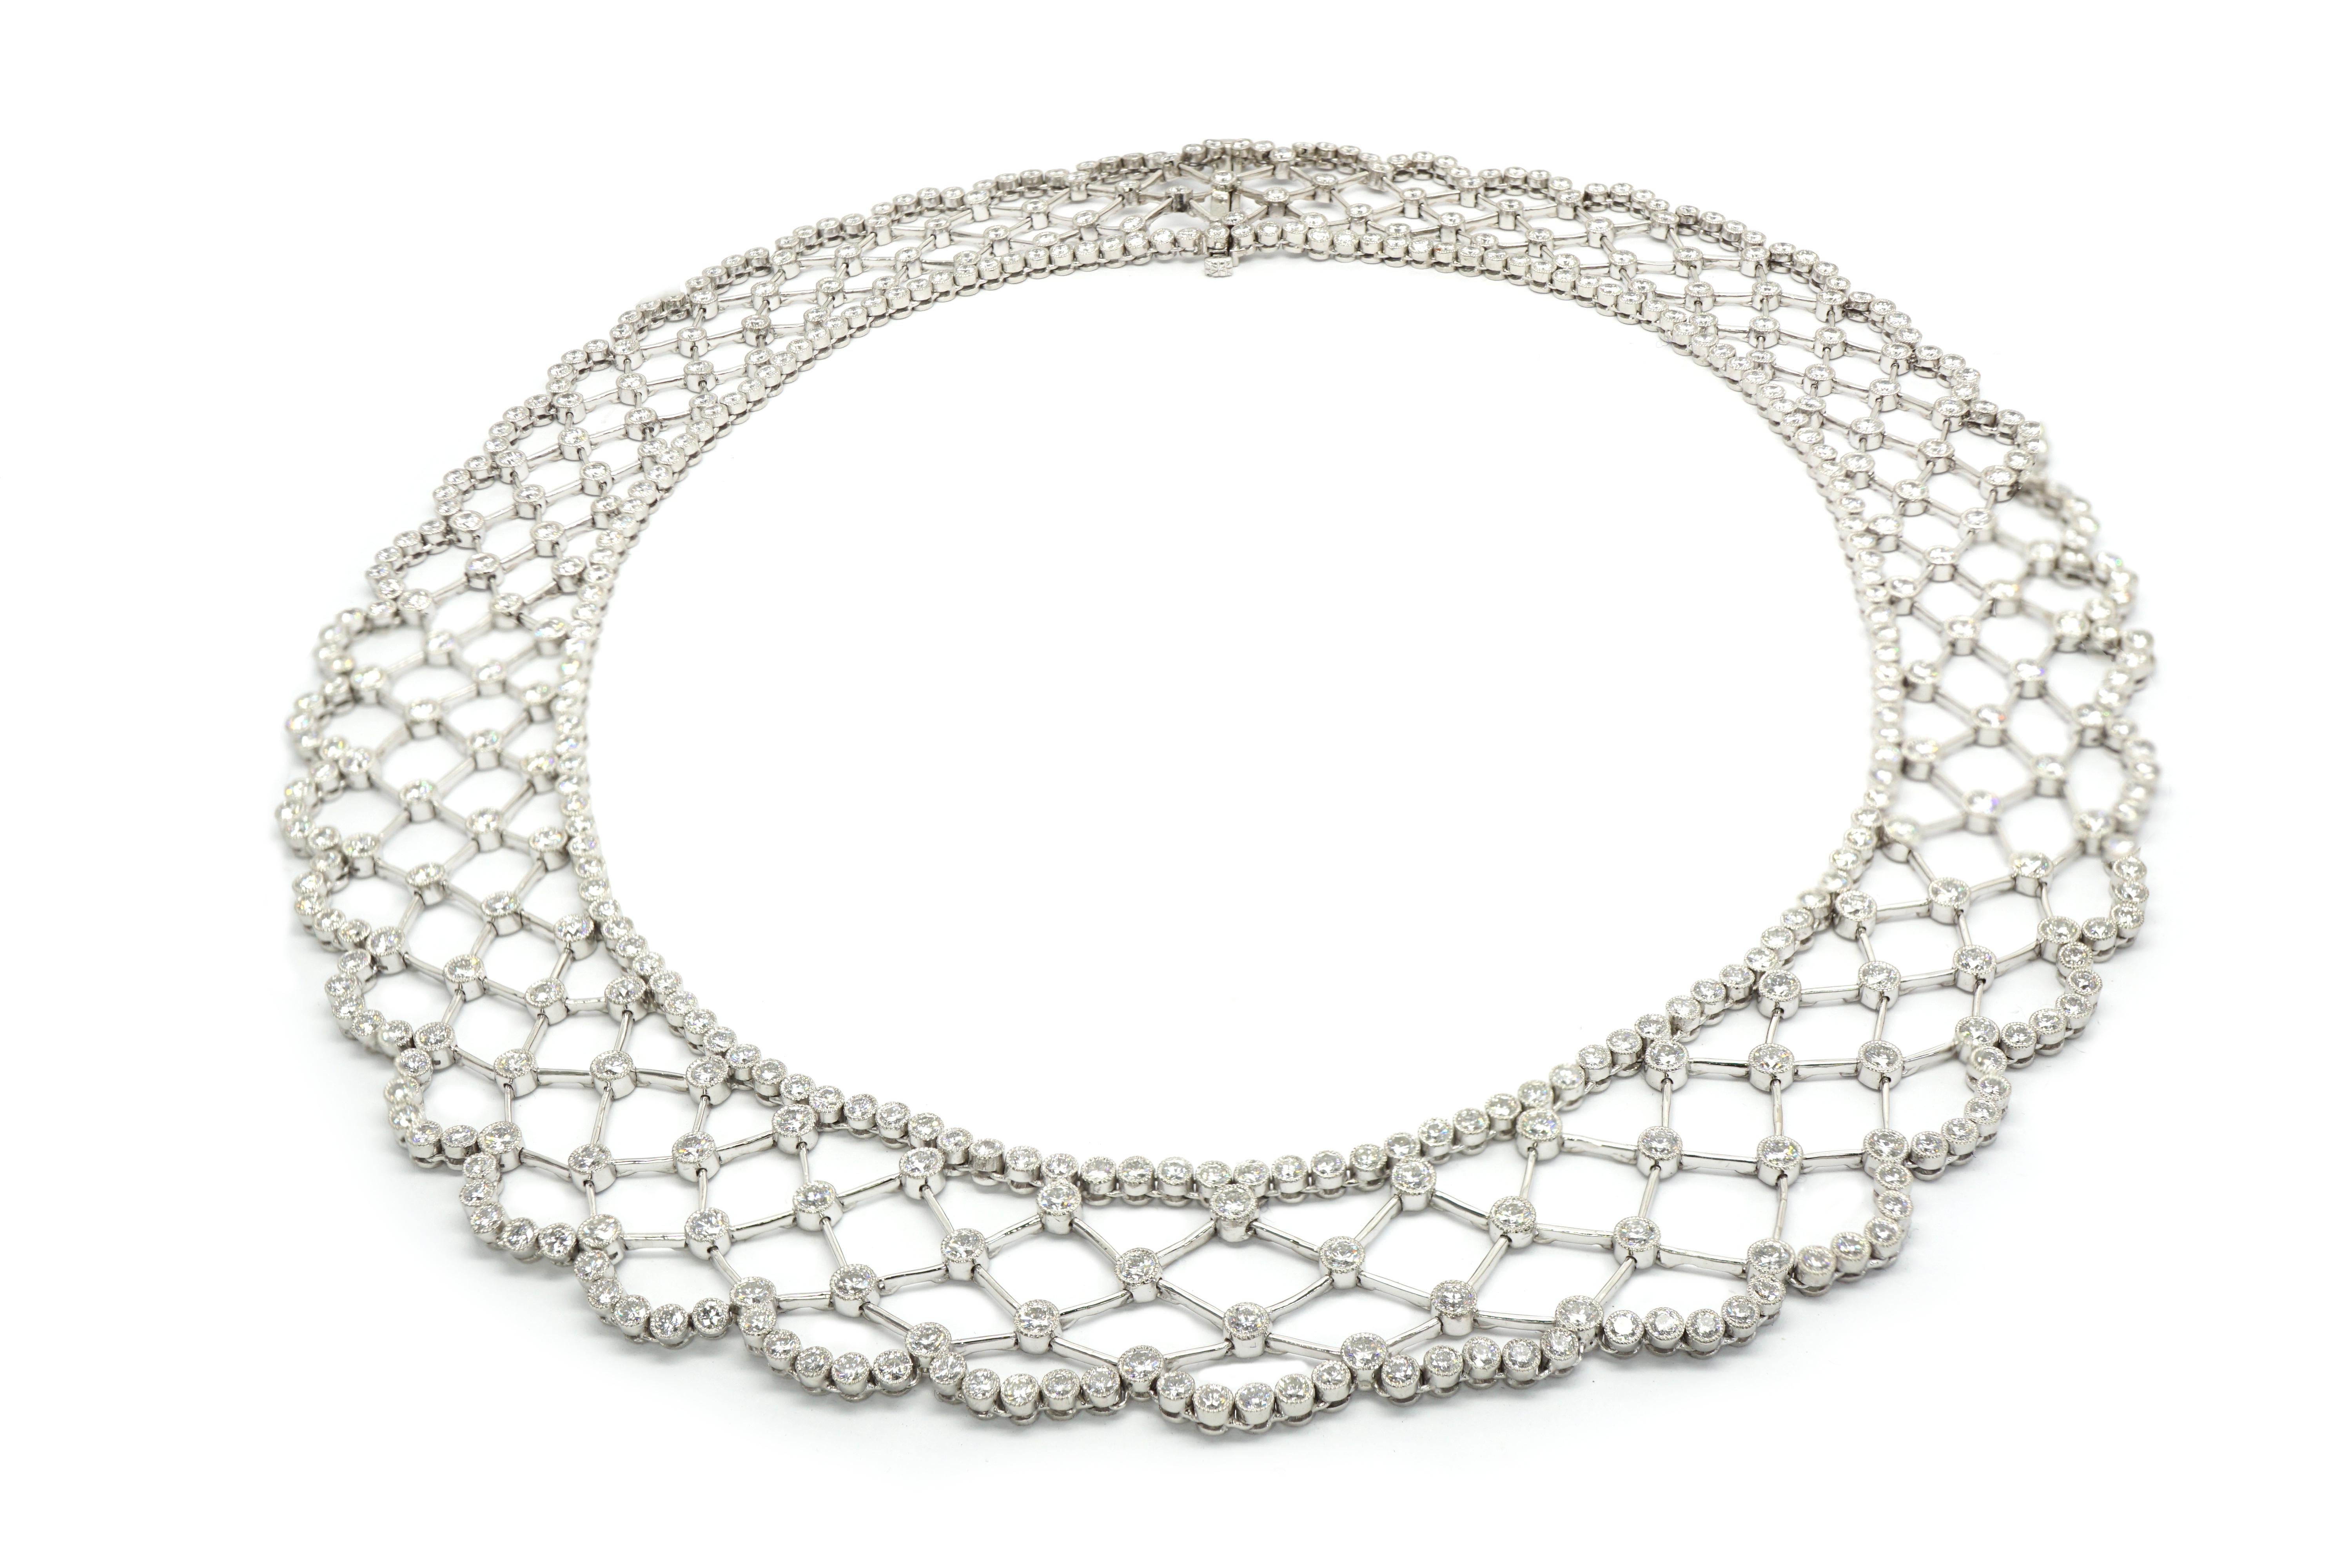 Sophia D 26.69 carat all diamond necklace set in platinum.

Sophia D by Joseph Dardashti LTD has been known worldwide for 35 years and are inspired by classic Art Deco design that merges with modern manufacturing techniques.
